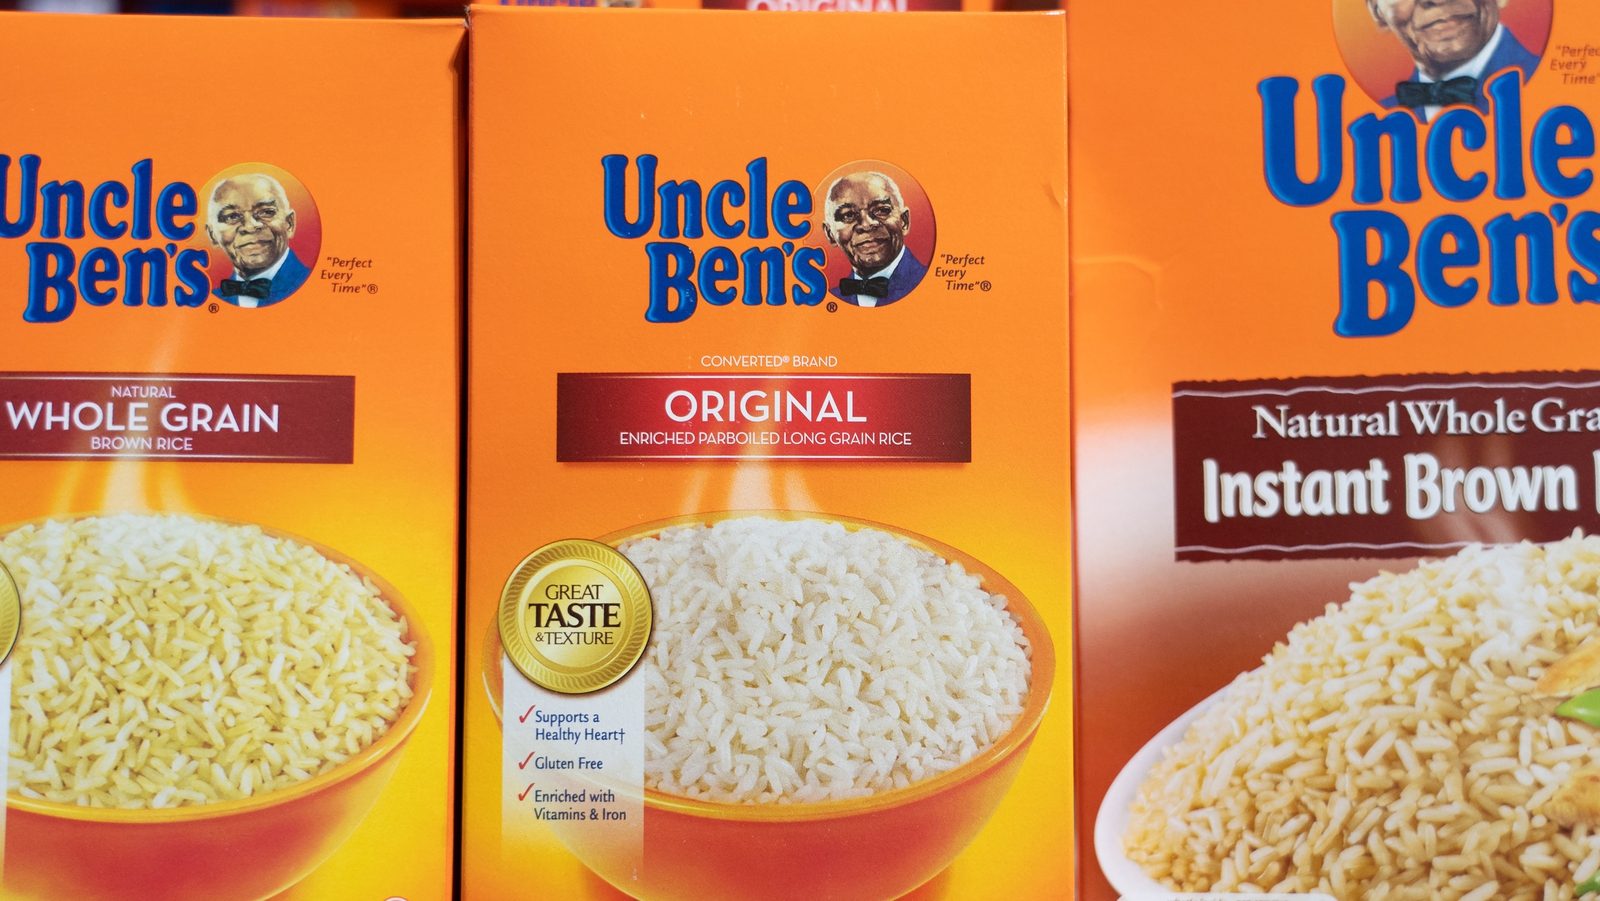 Uncle Ben's' rebrand after racial stereotype criticism